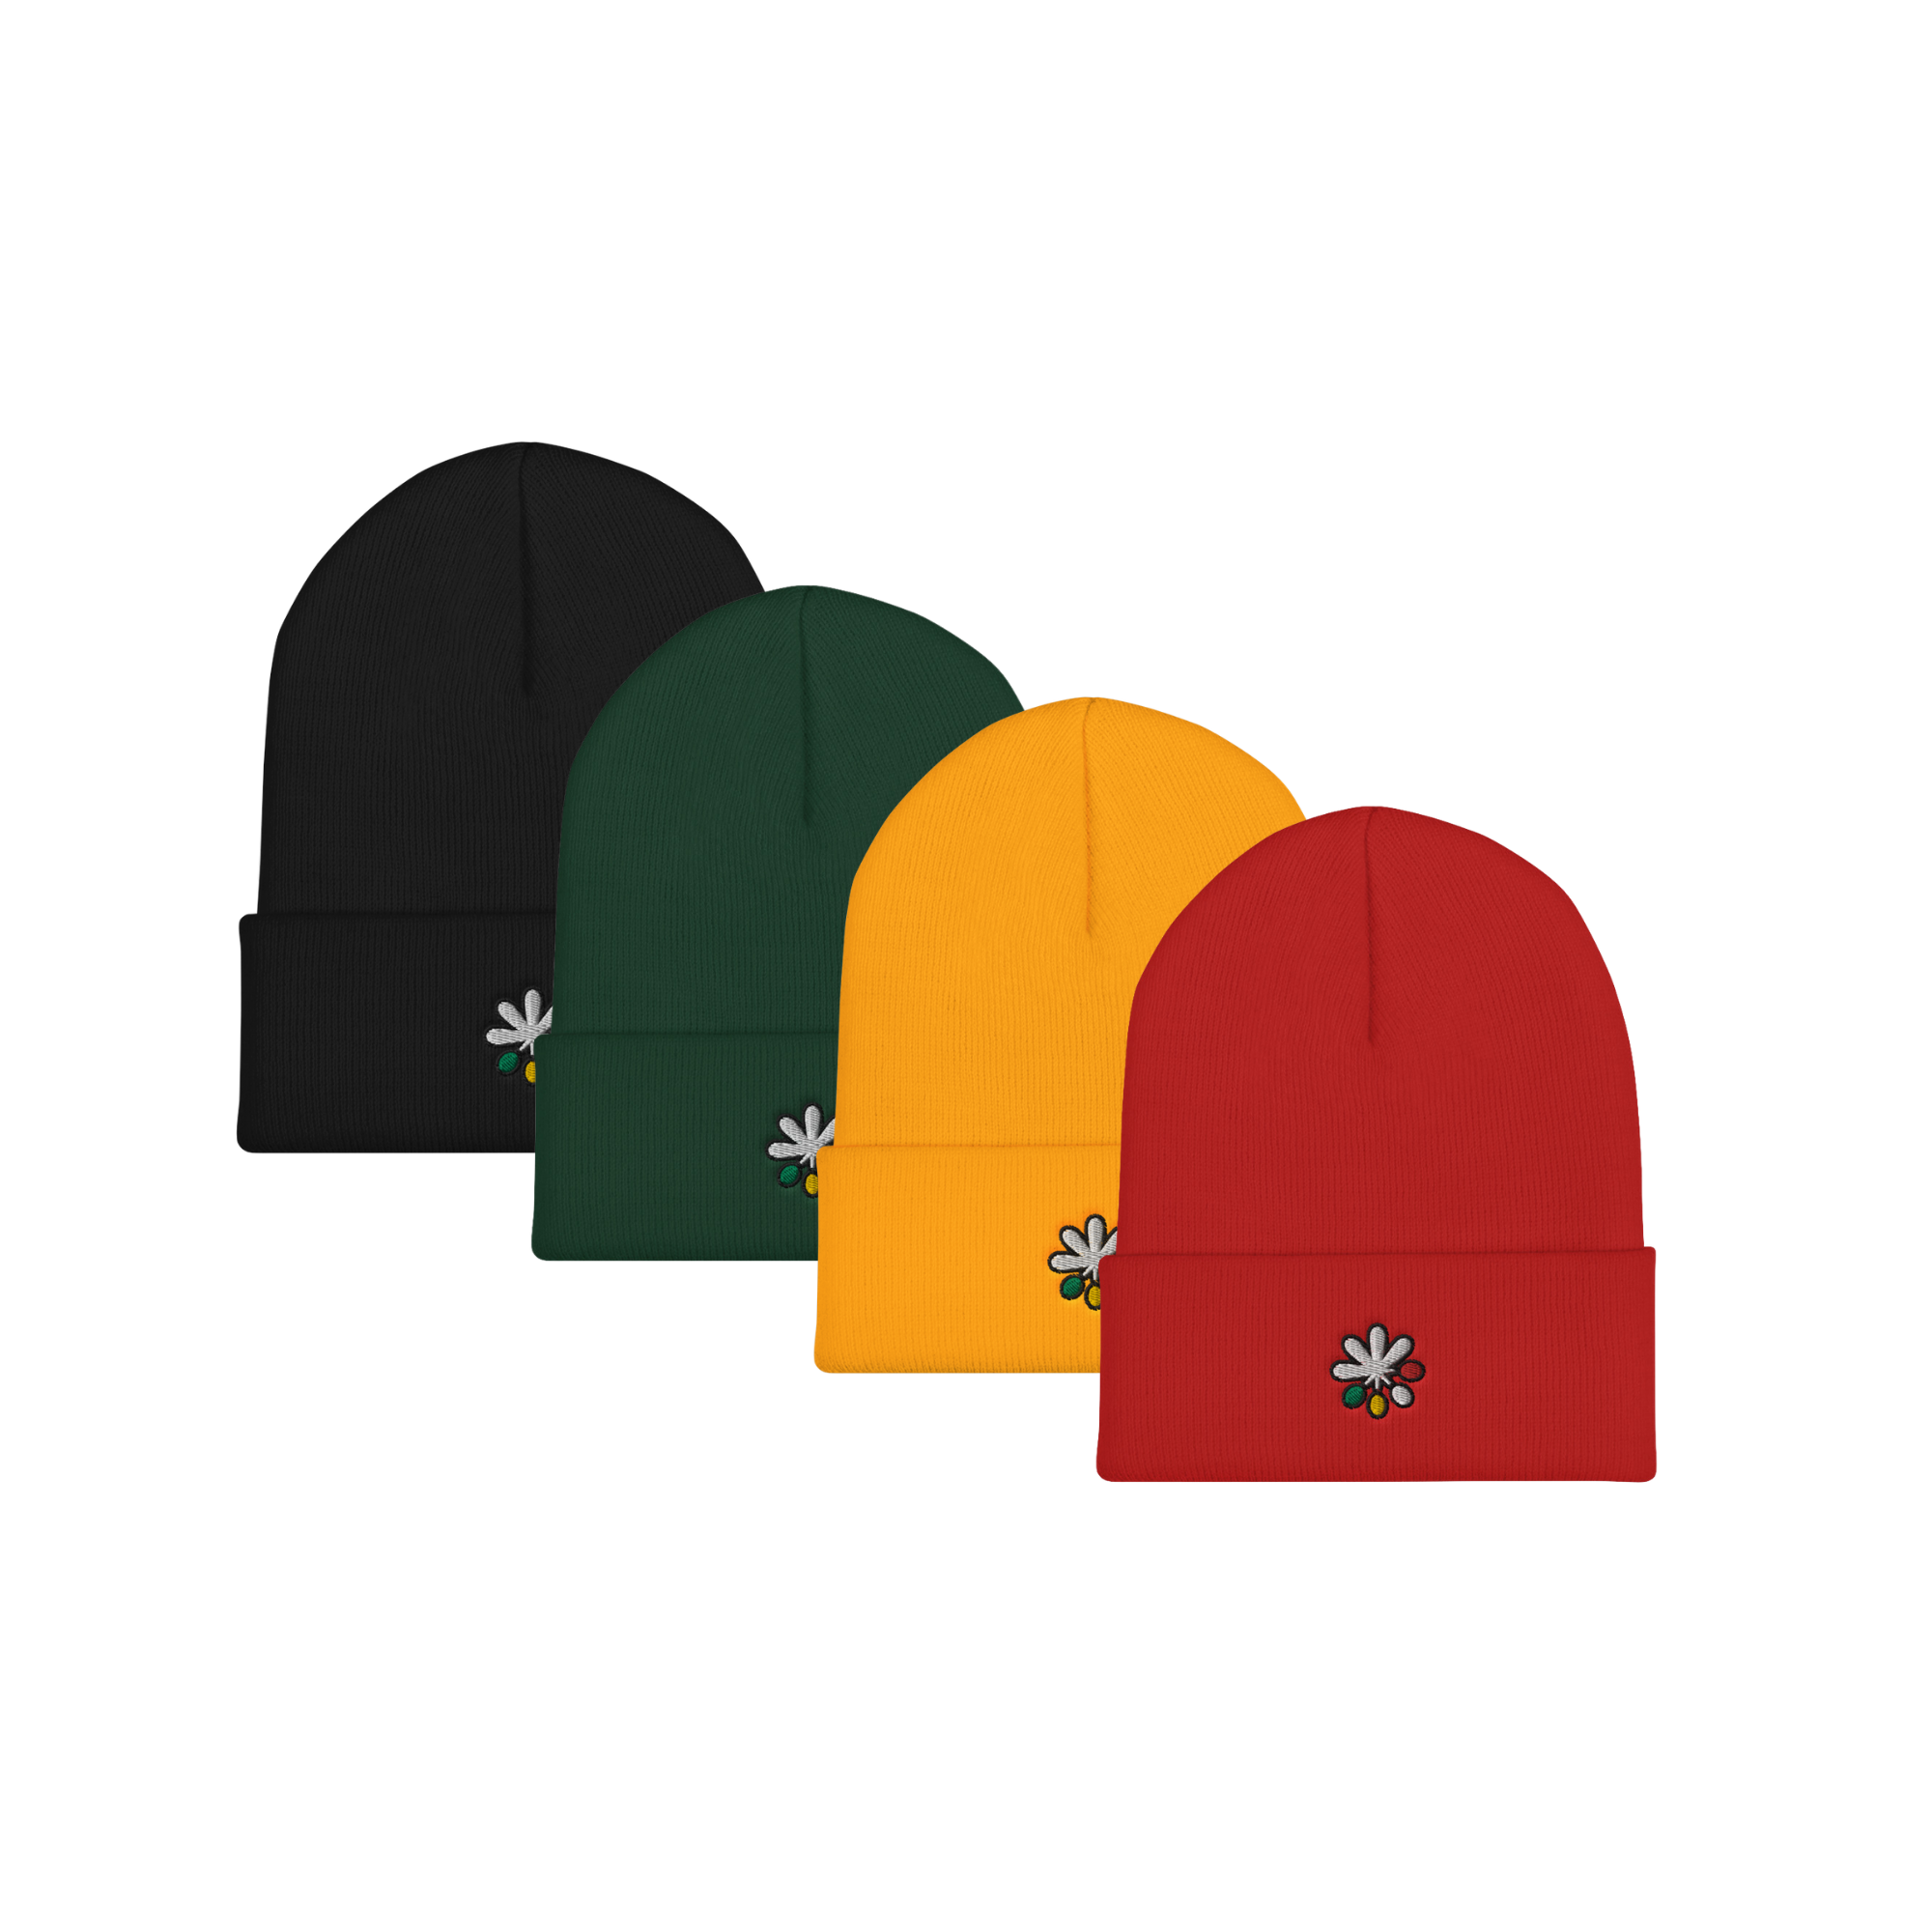 Beanie hats are always clutch in cold temperatures. The colors of the Selassie Beanie are a proclamation of the support for African liberation, pride, and progressivism. Our soft and comfortable acrylic beanies for men and women are sure to complement your style.